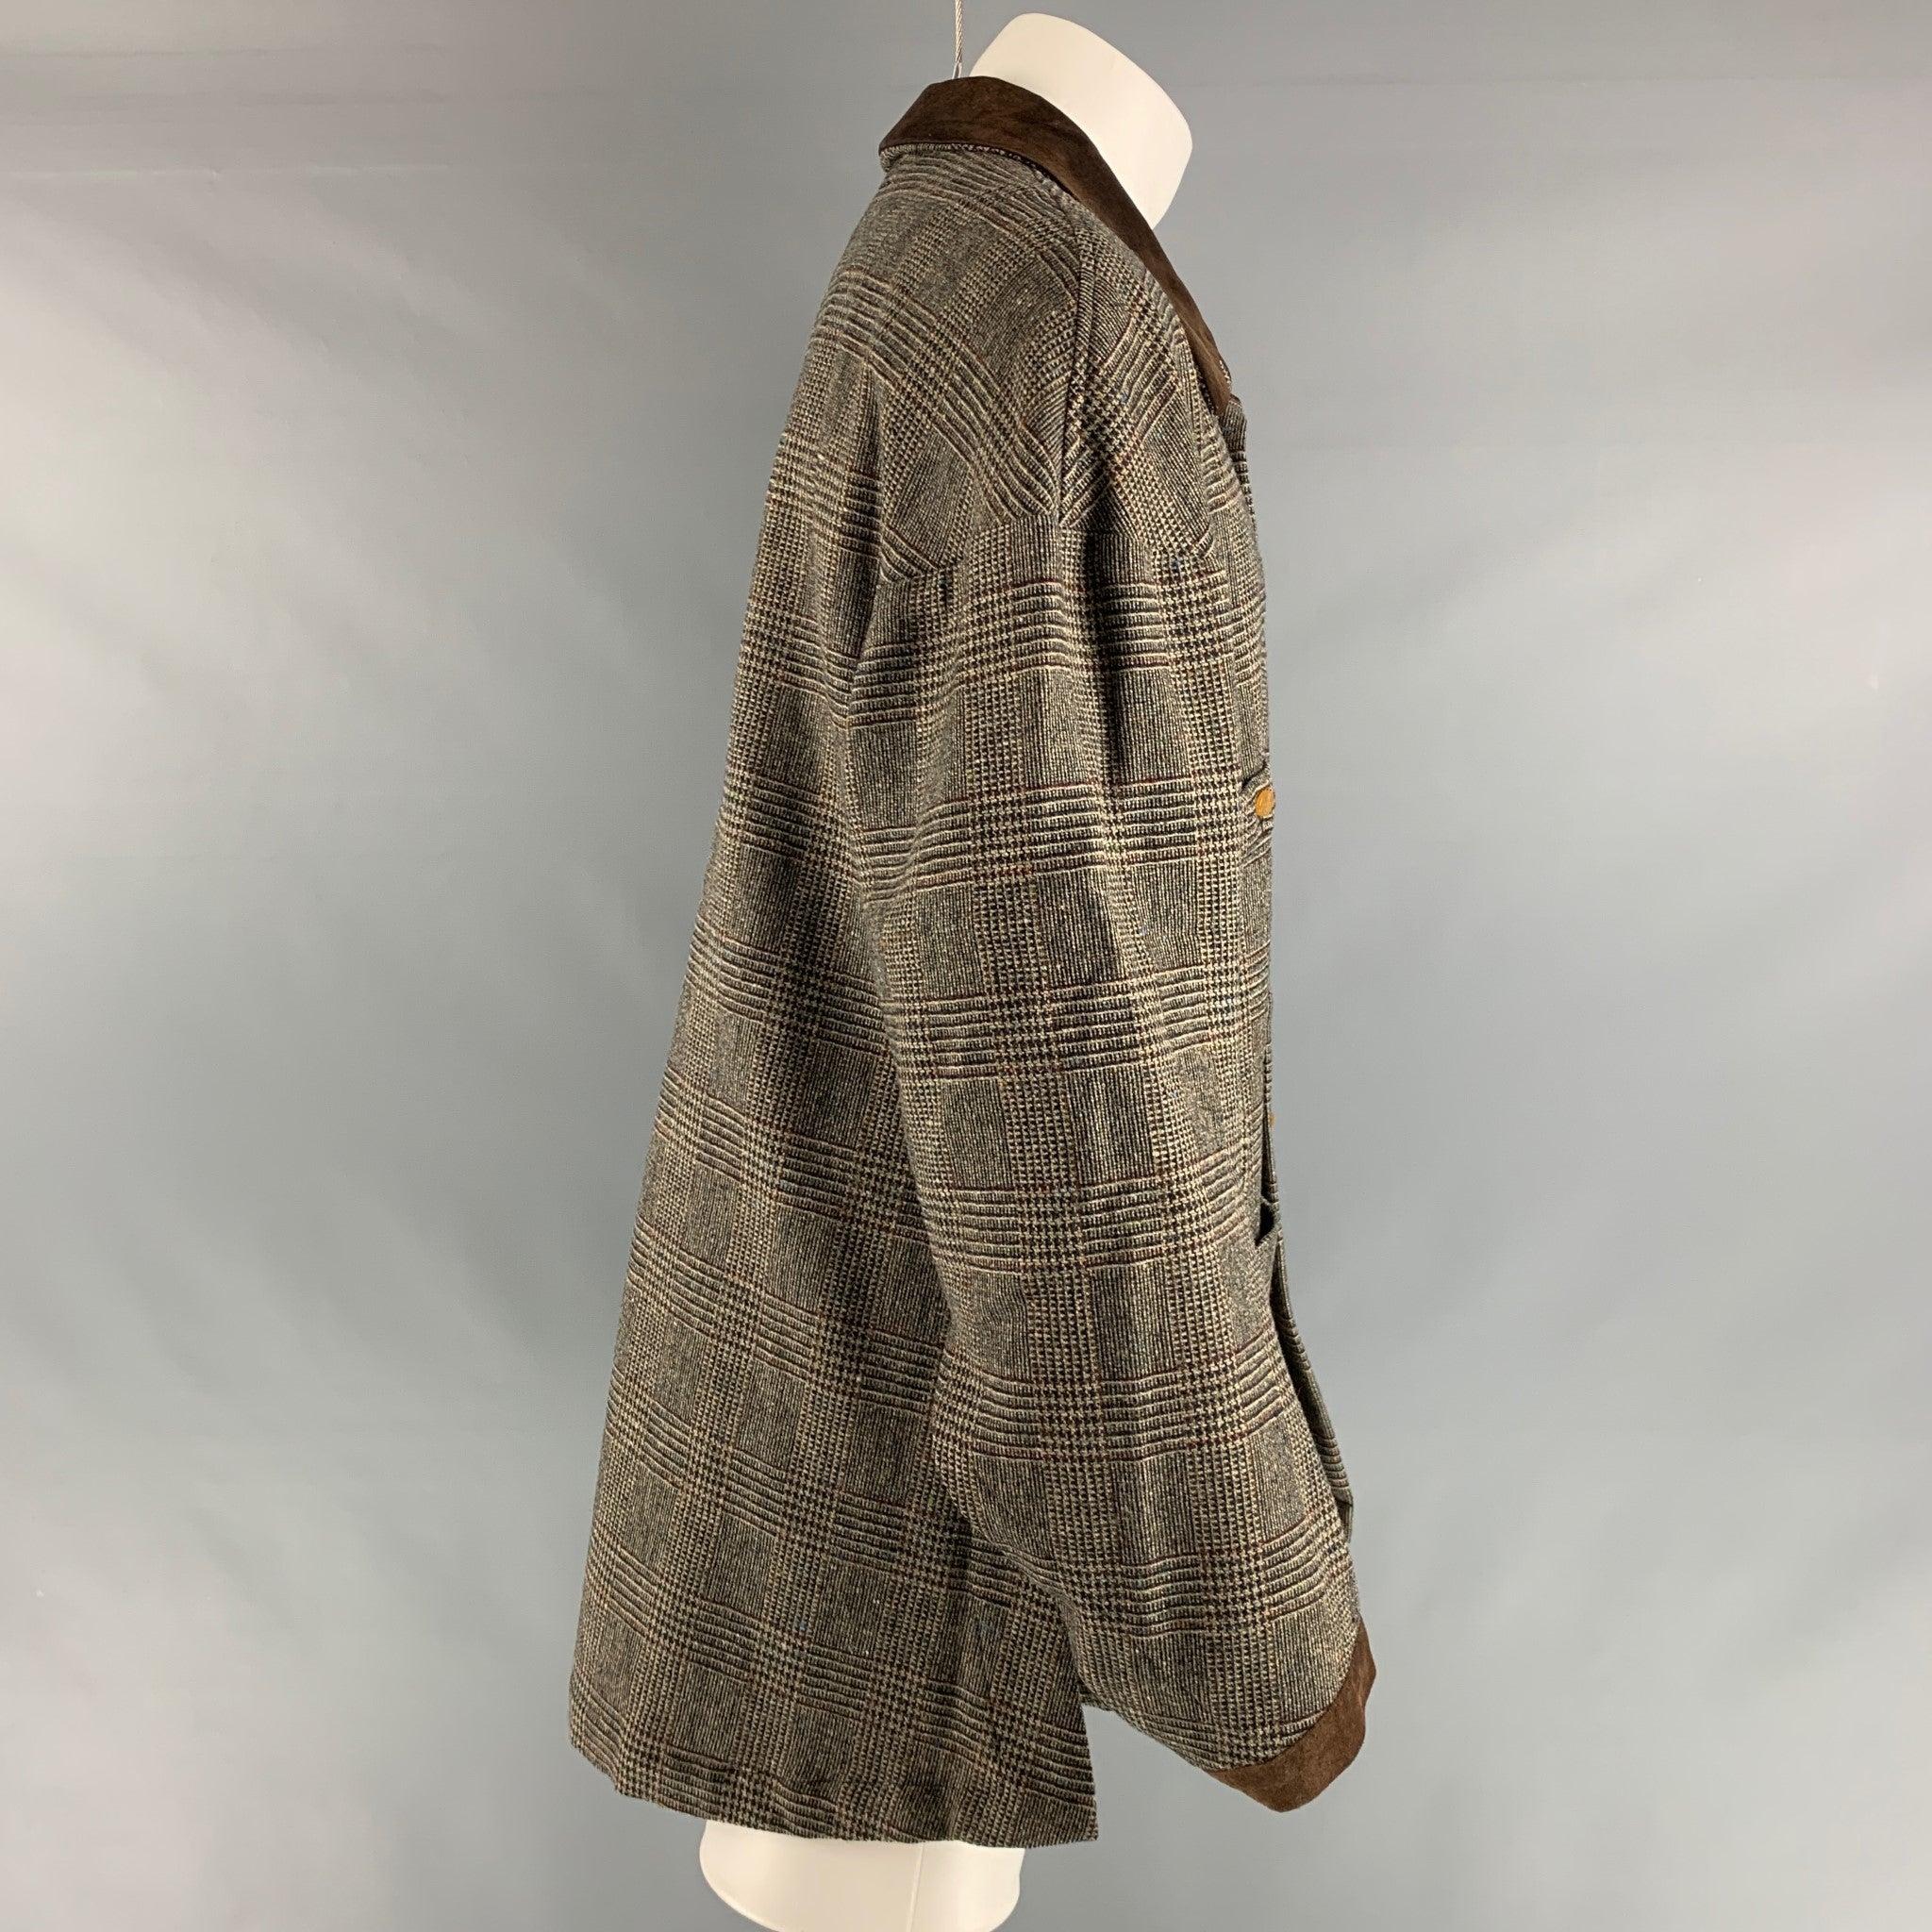 VIVIENNE WESTWOOD MAN Size 40 Brown Black Plaid Lambswool Coat In Good Condition For Sale In San Francisco, CA